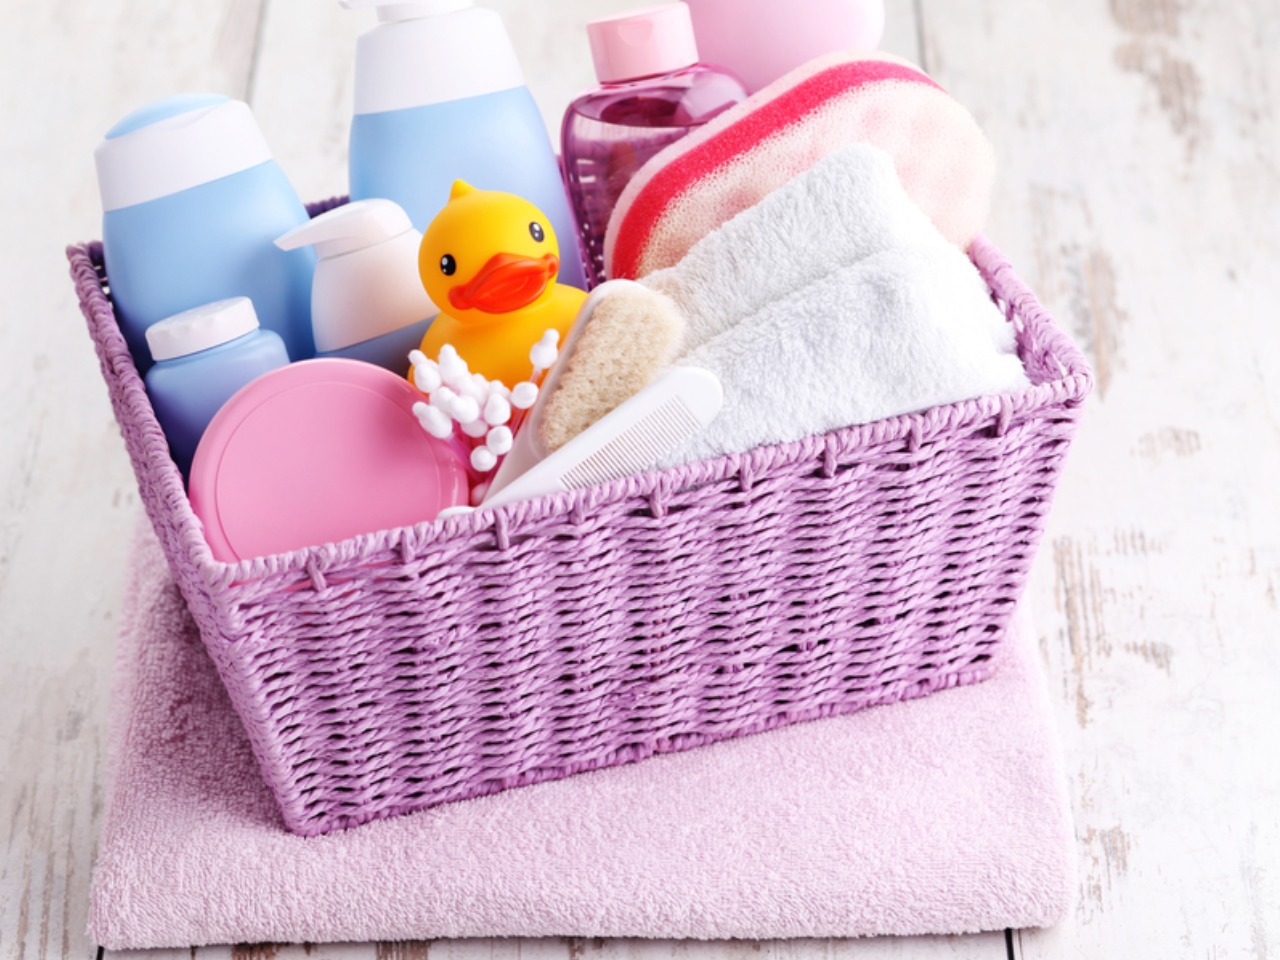 Convenient Baby Hamper Delivery for New Parents in Singapore